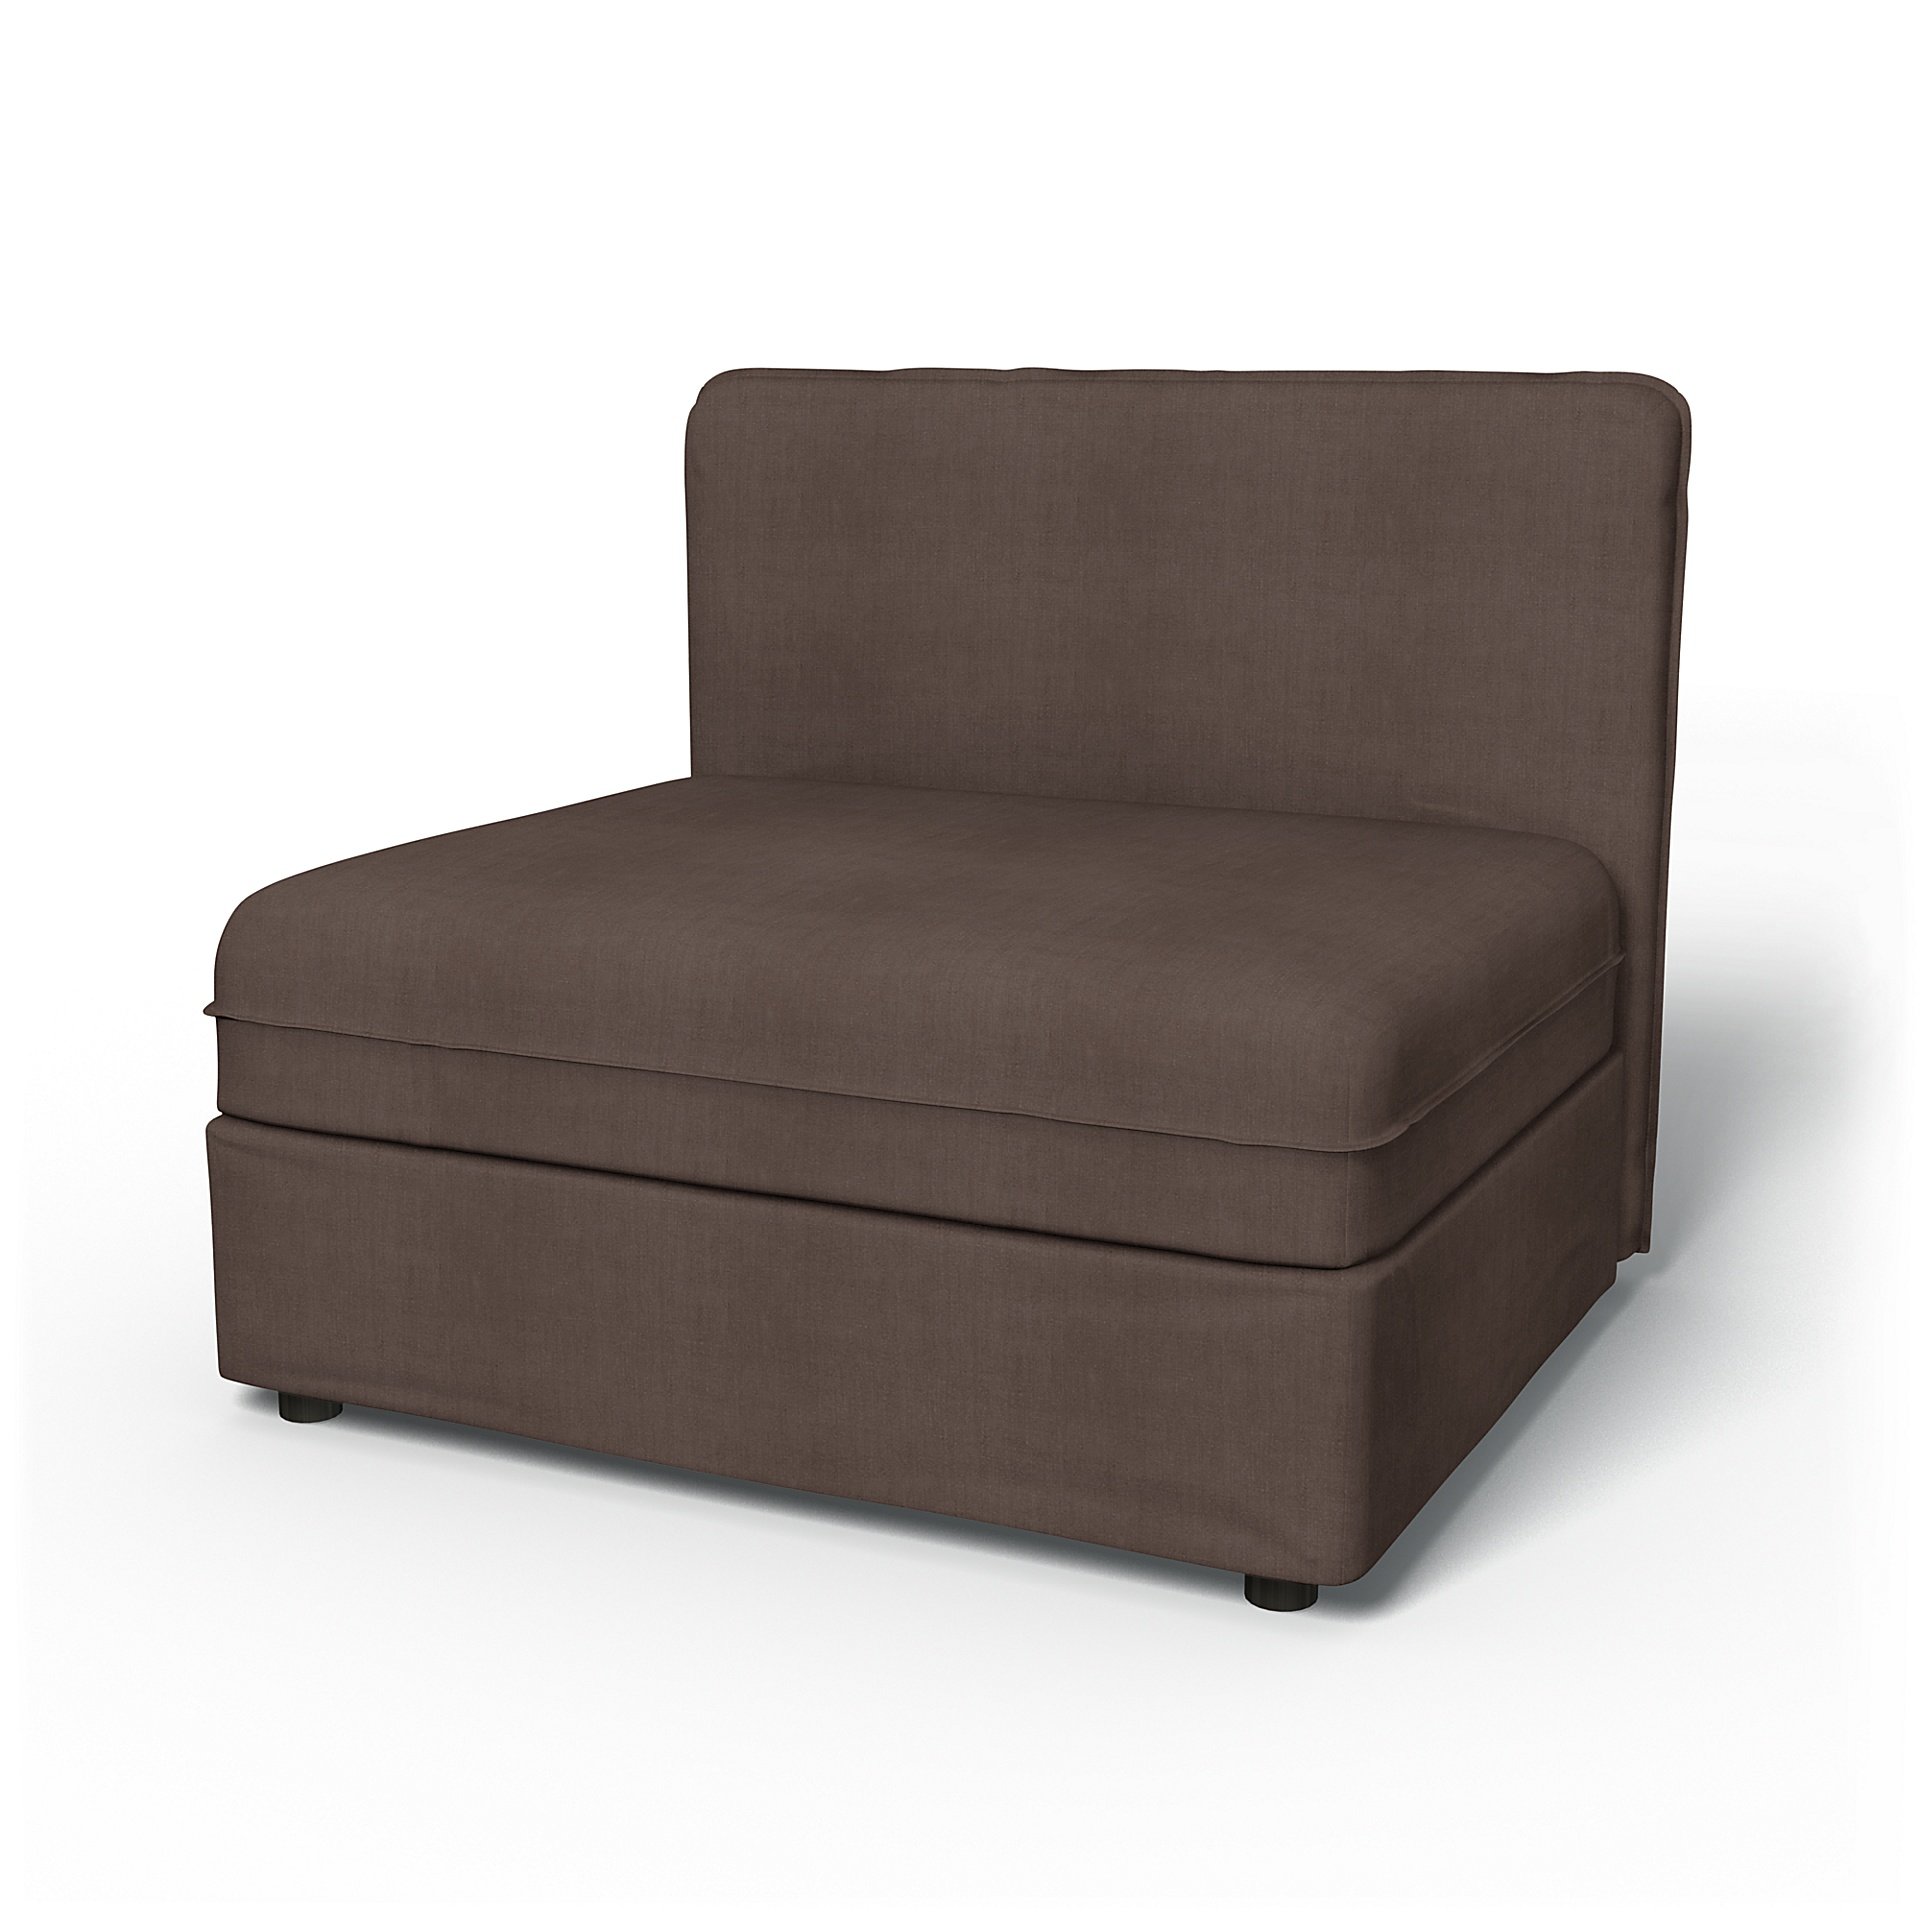 IKEA - Vallentuna Seat Module with Low Back Cover 100x80cm 39x32in, Cocoa, Linen - Bemz